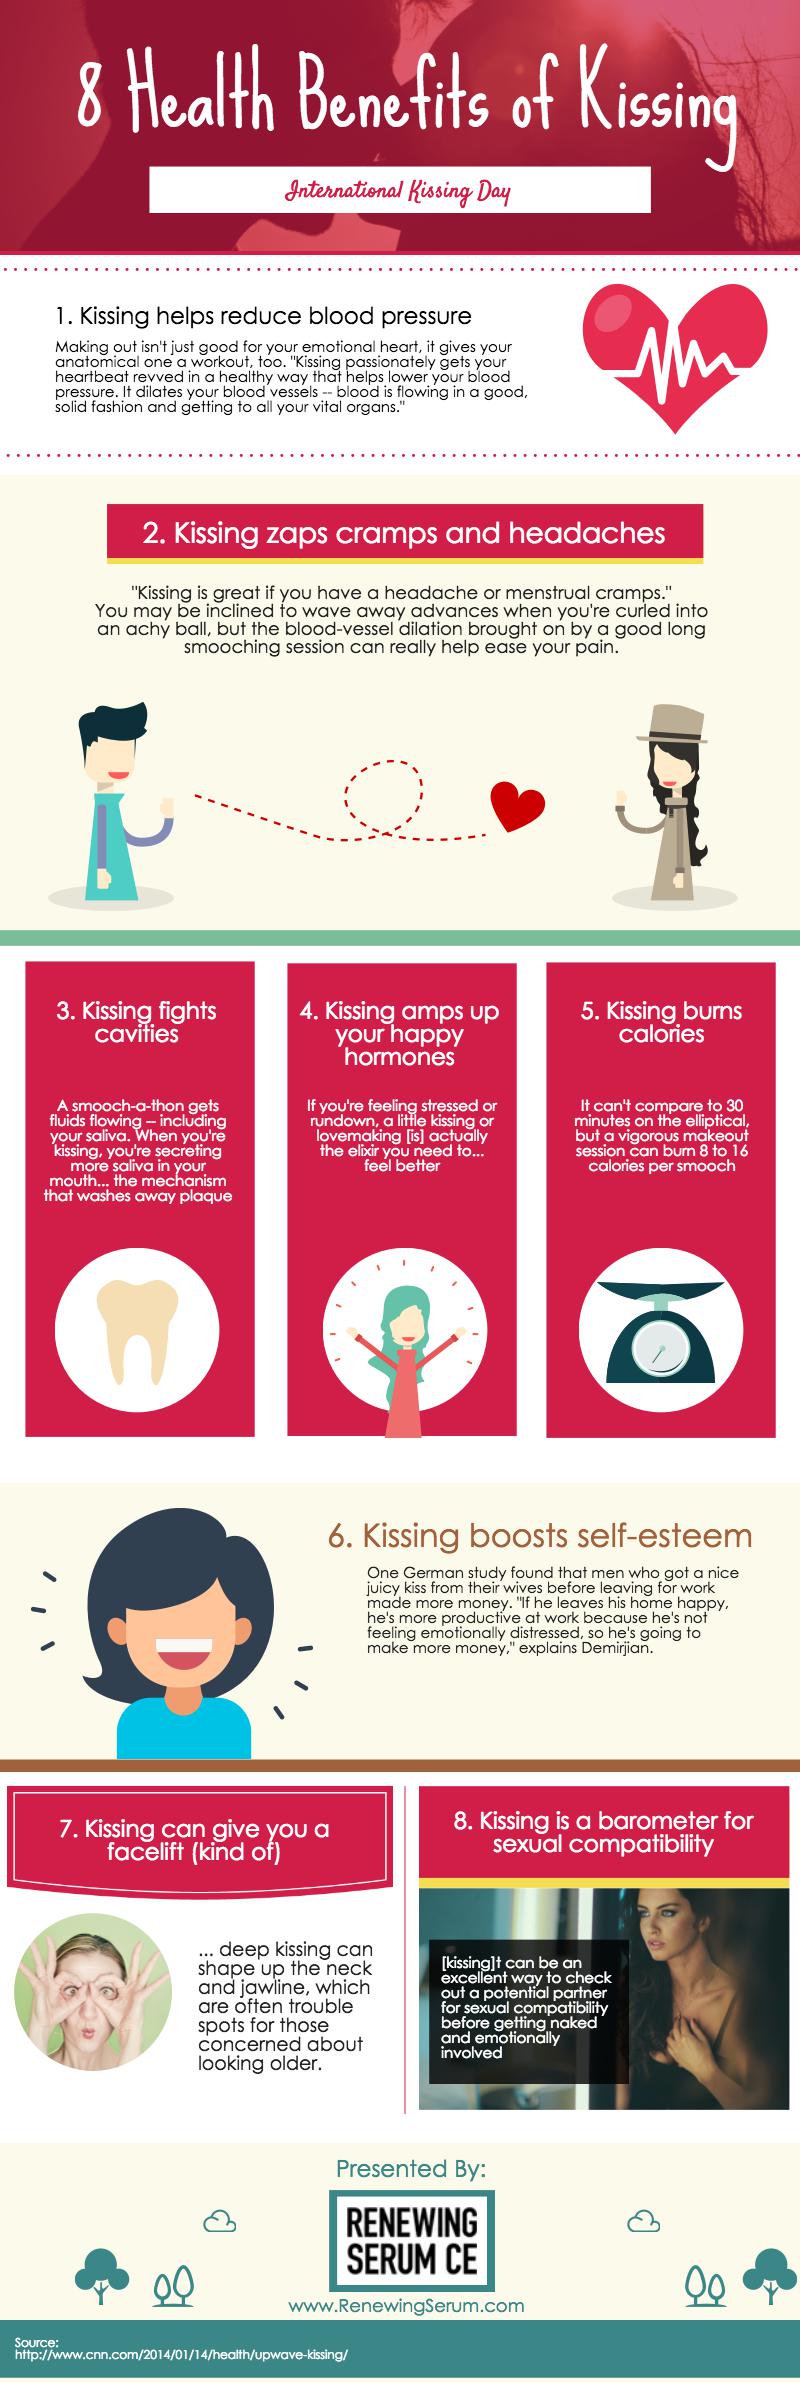 8 Health Benefits of Kissing